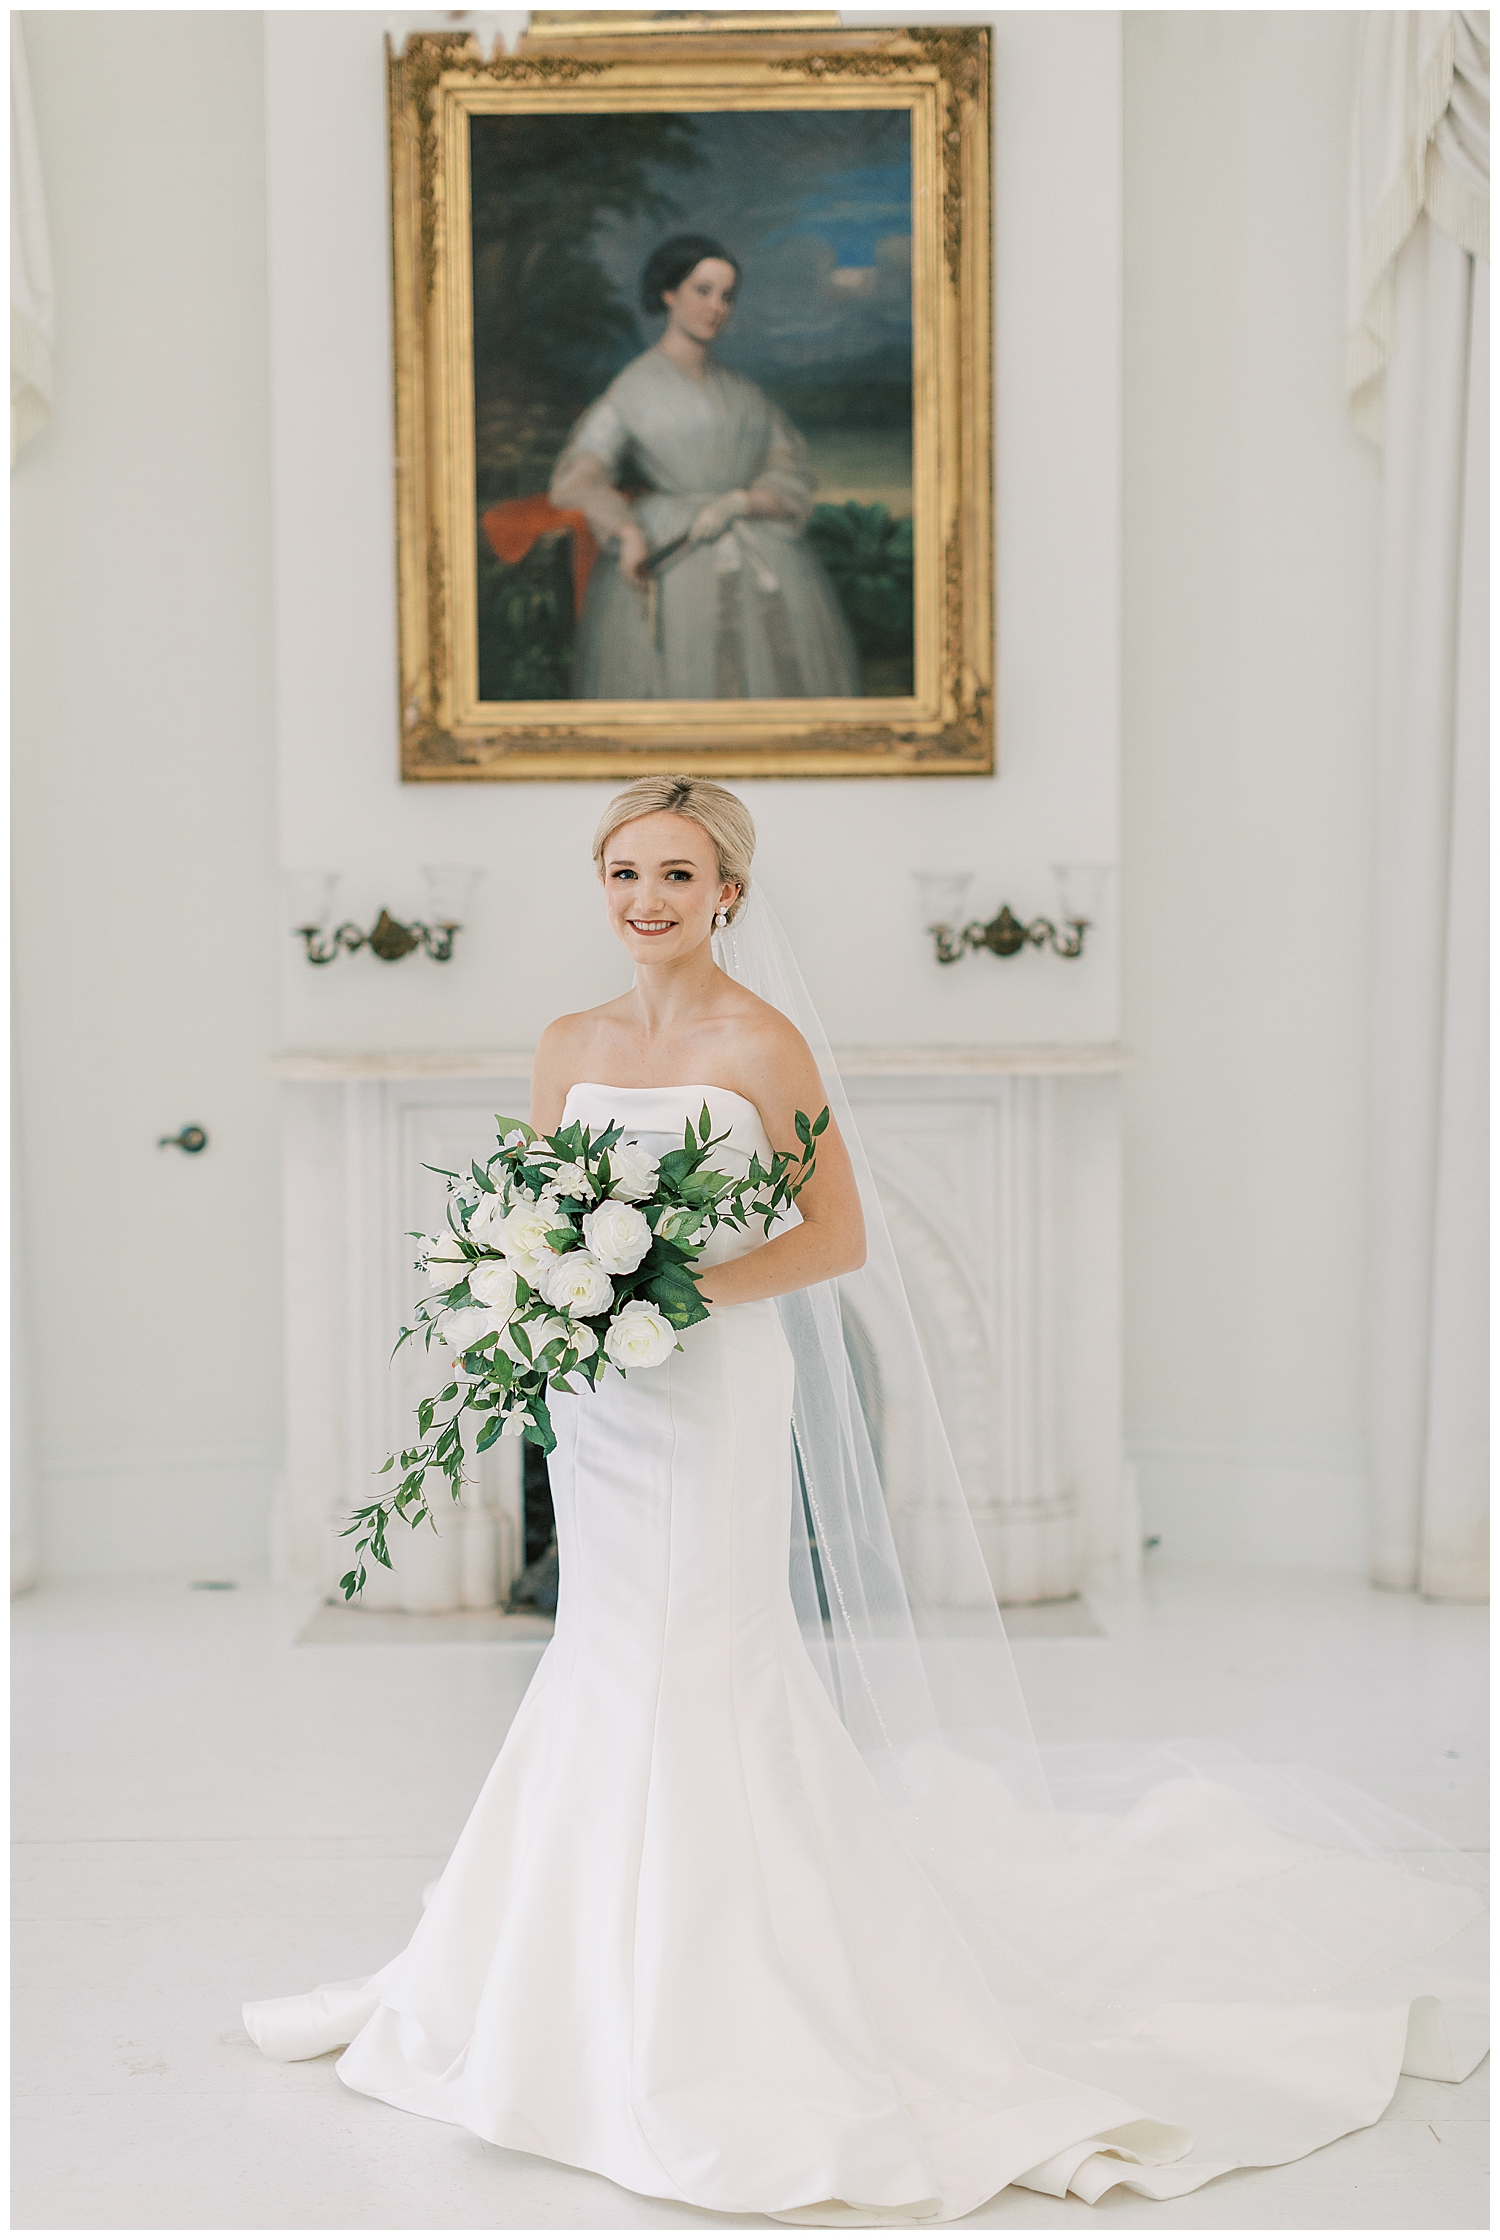 A vintage painting hangs on the wall behind the bride in a white room.